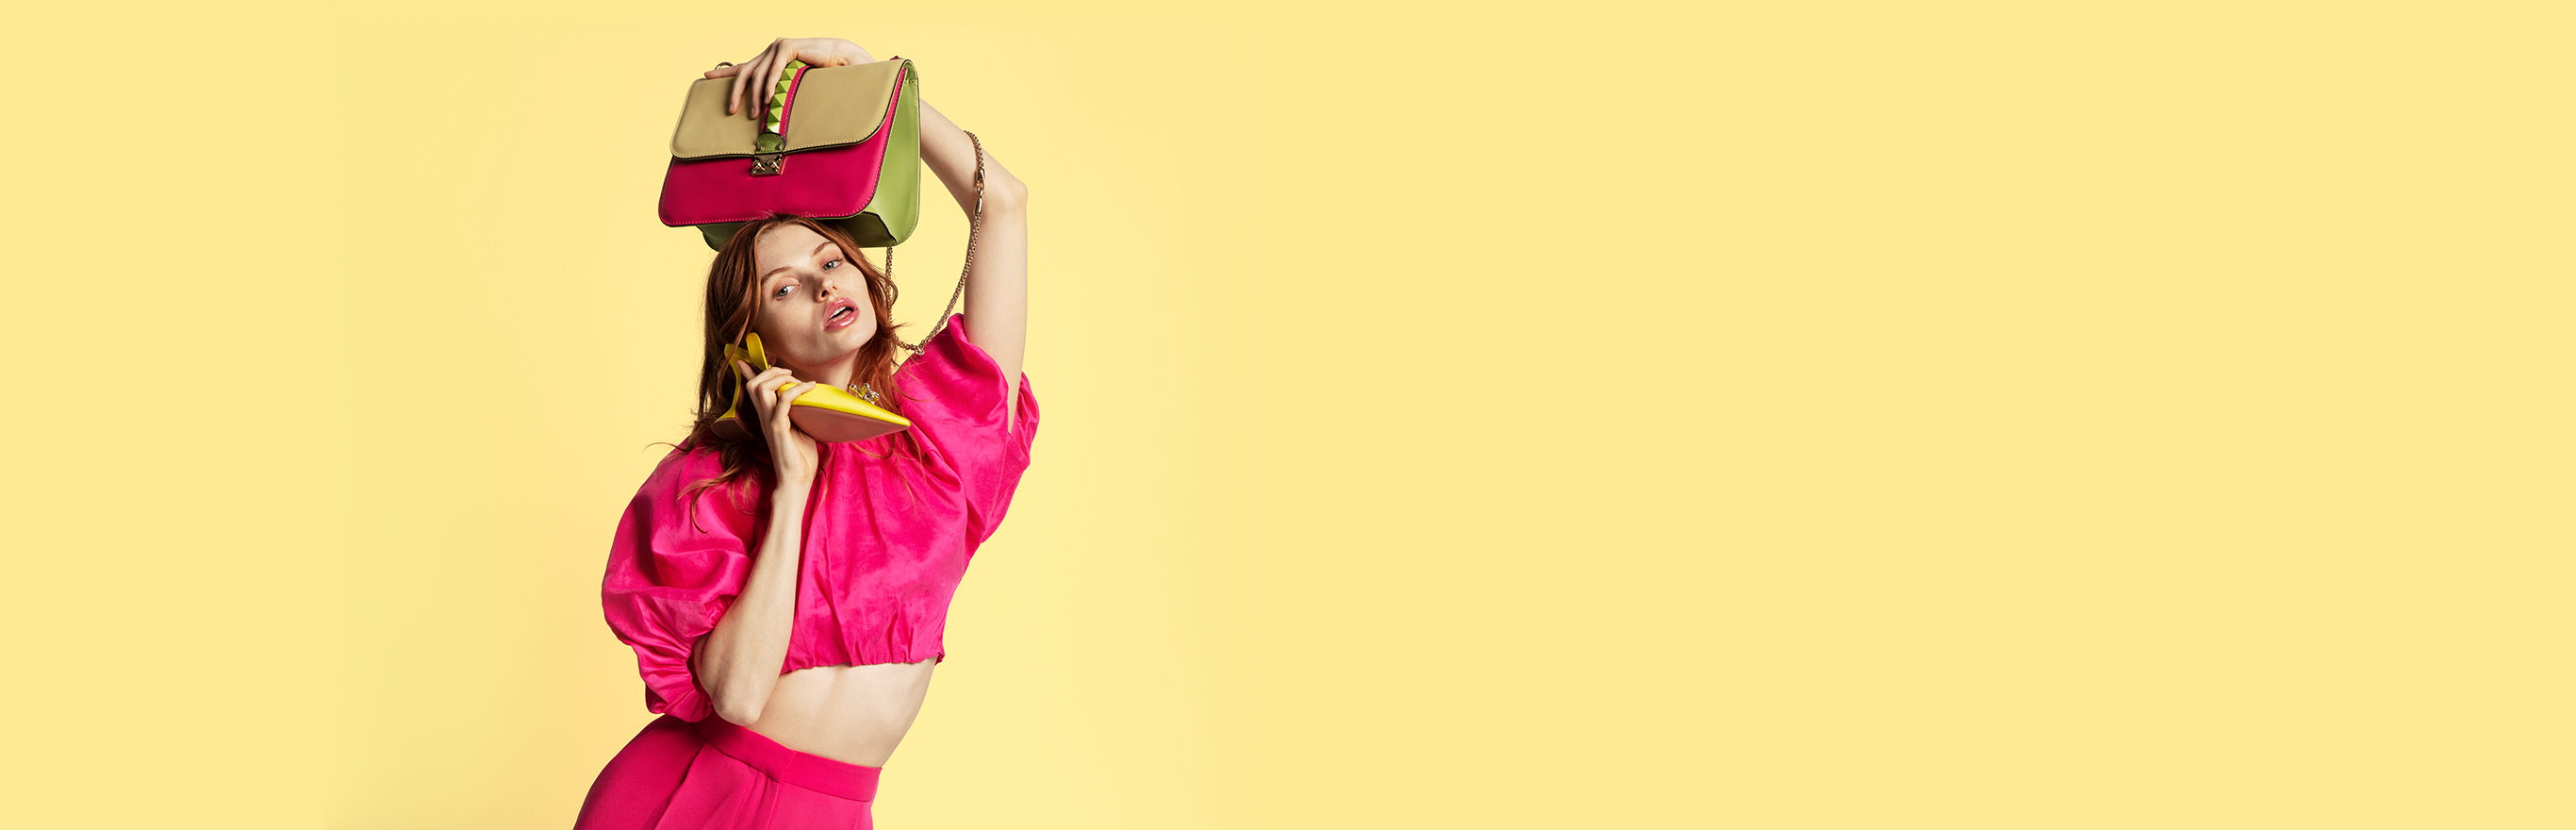 A young woman in a pink magenta crop top holding a purse over her head and speaking into a yellow high heel as a phone